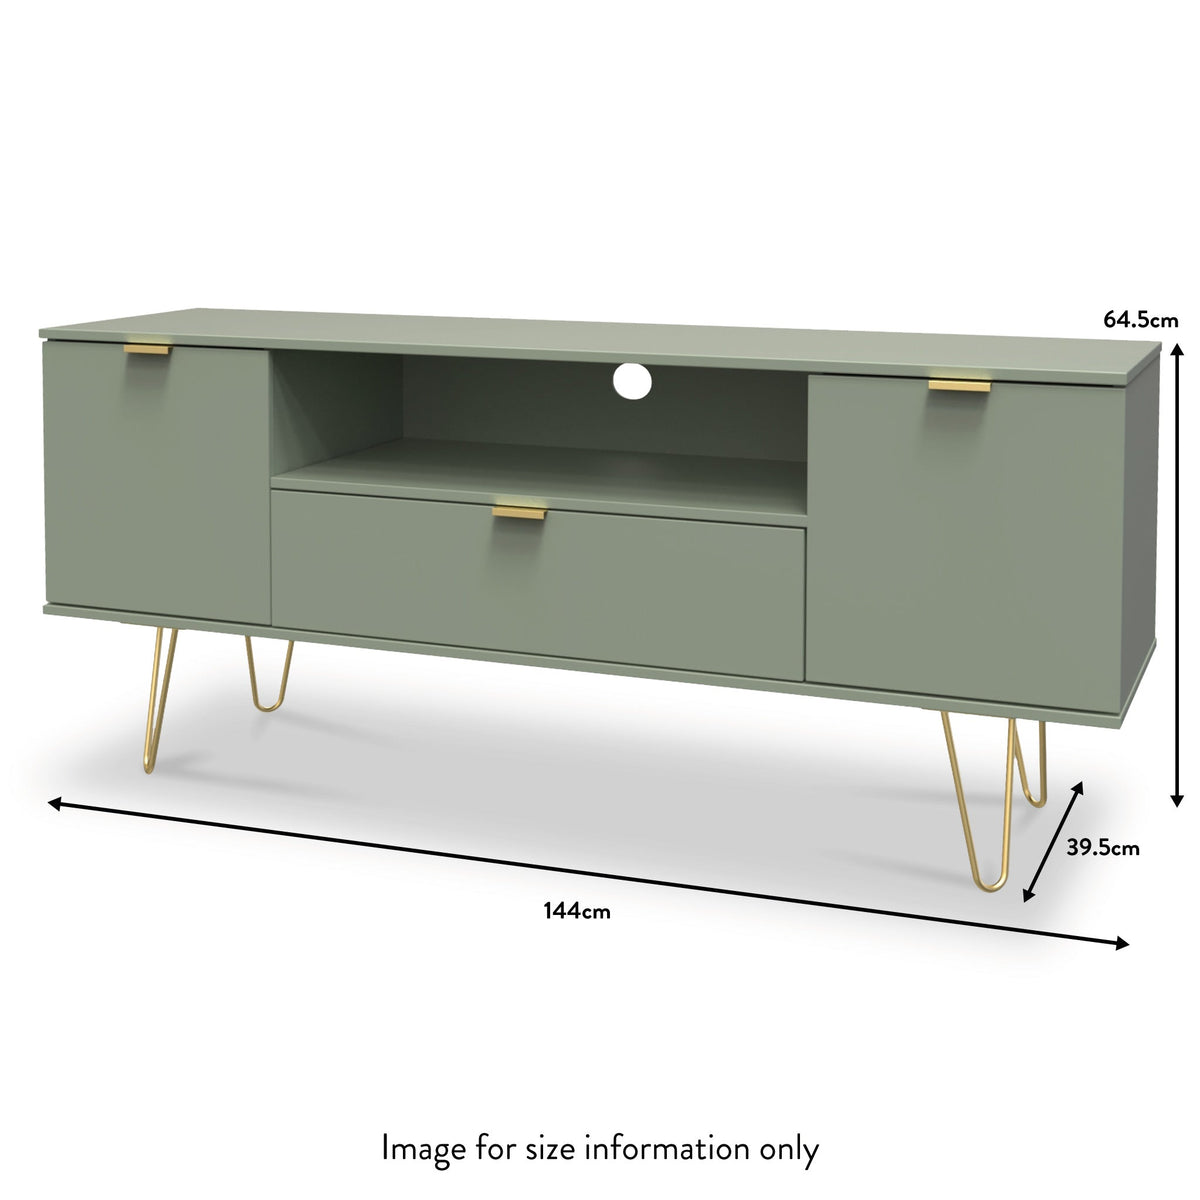 Moreno Olive Green 2 Door 1 Drawer Large TV Unit with Gold Hairpin Legs dimensions guide